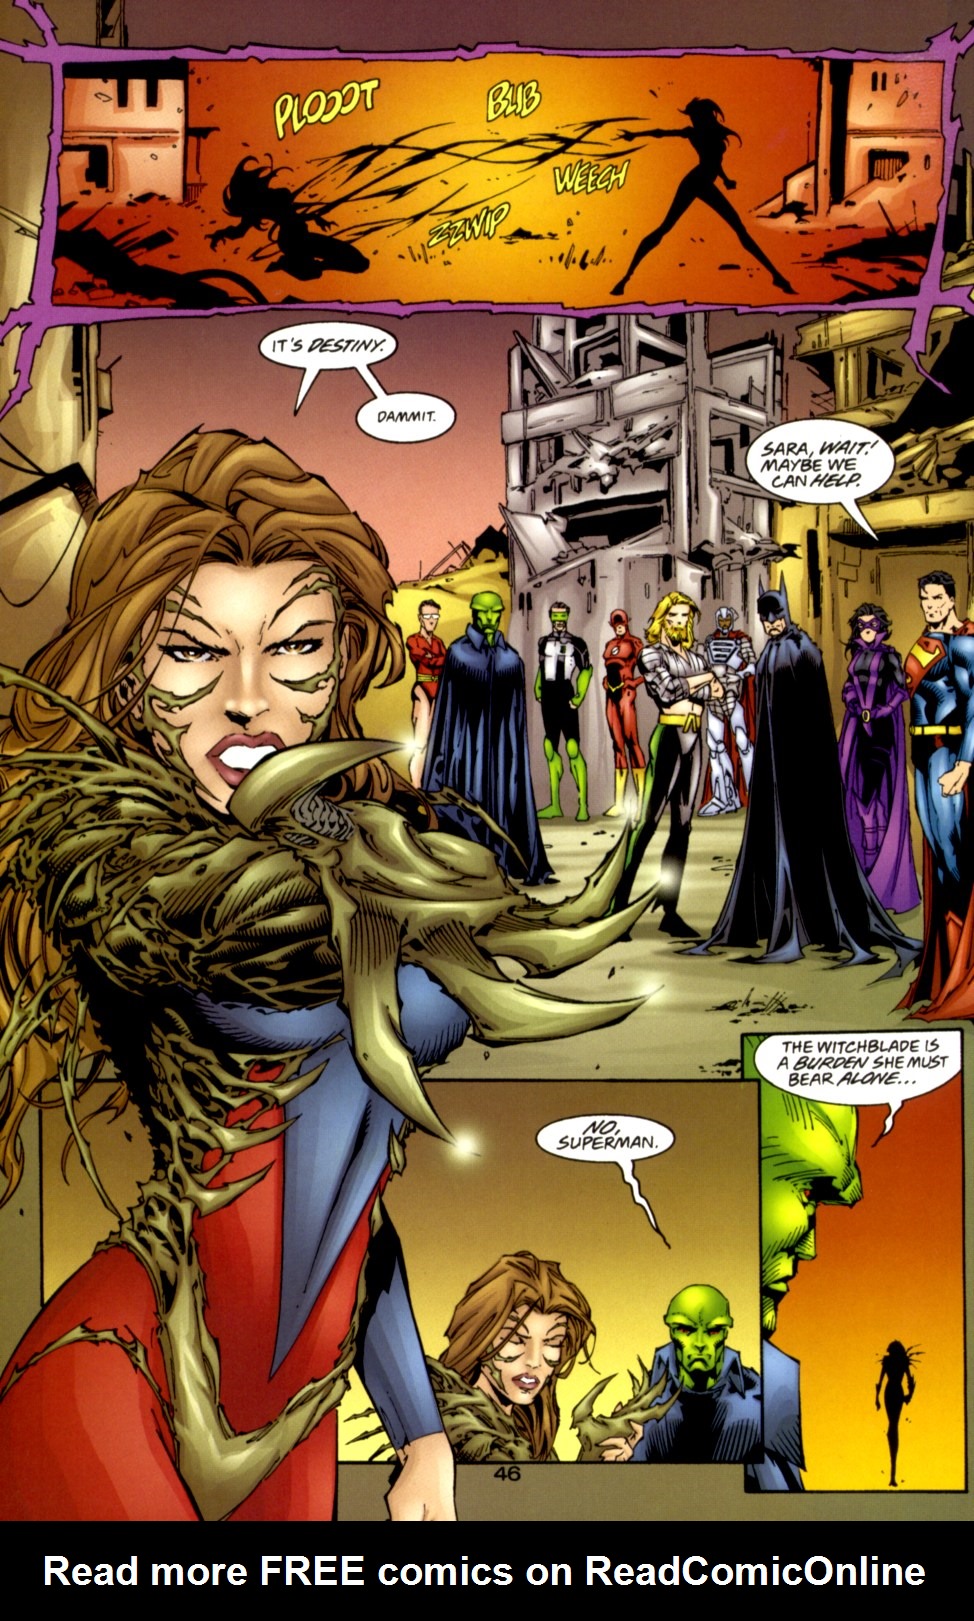 Read online JLA/Witchblade comic -  Issue # Full - 43